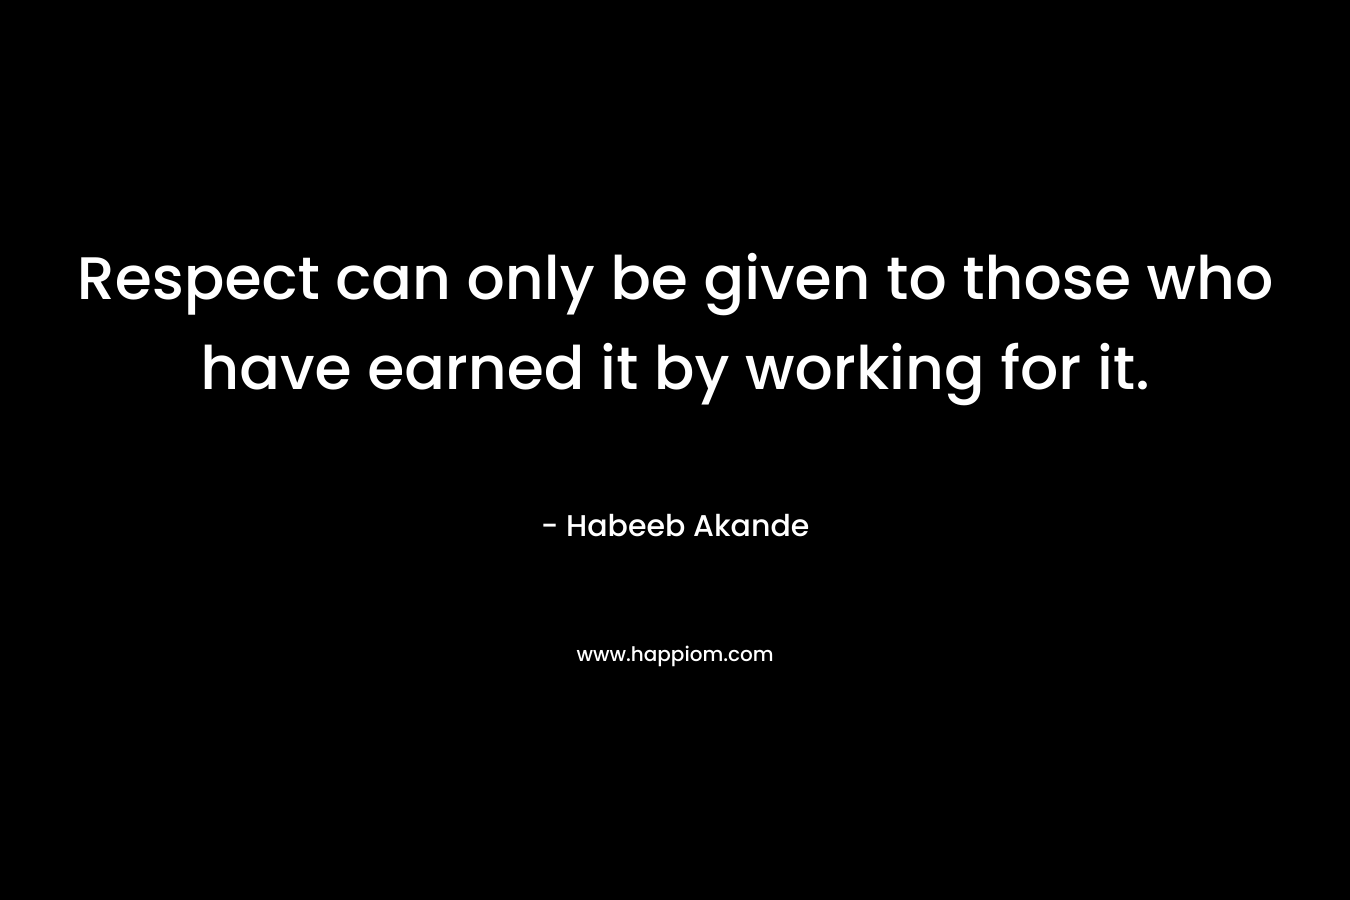 Respect can only be given to those who have earned it by working for it.